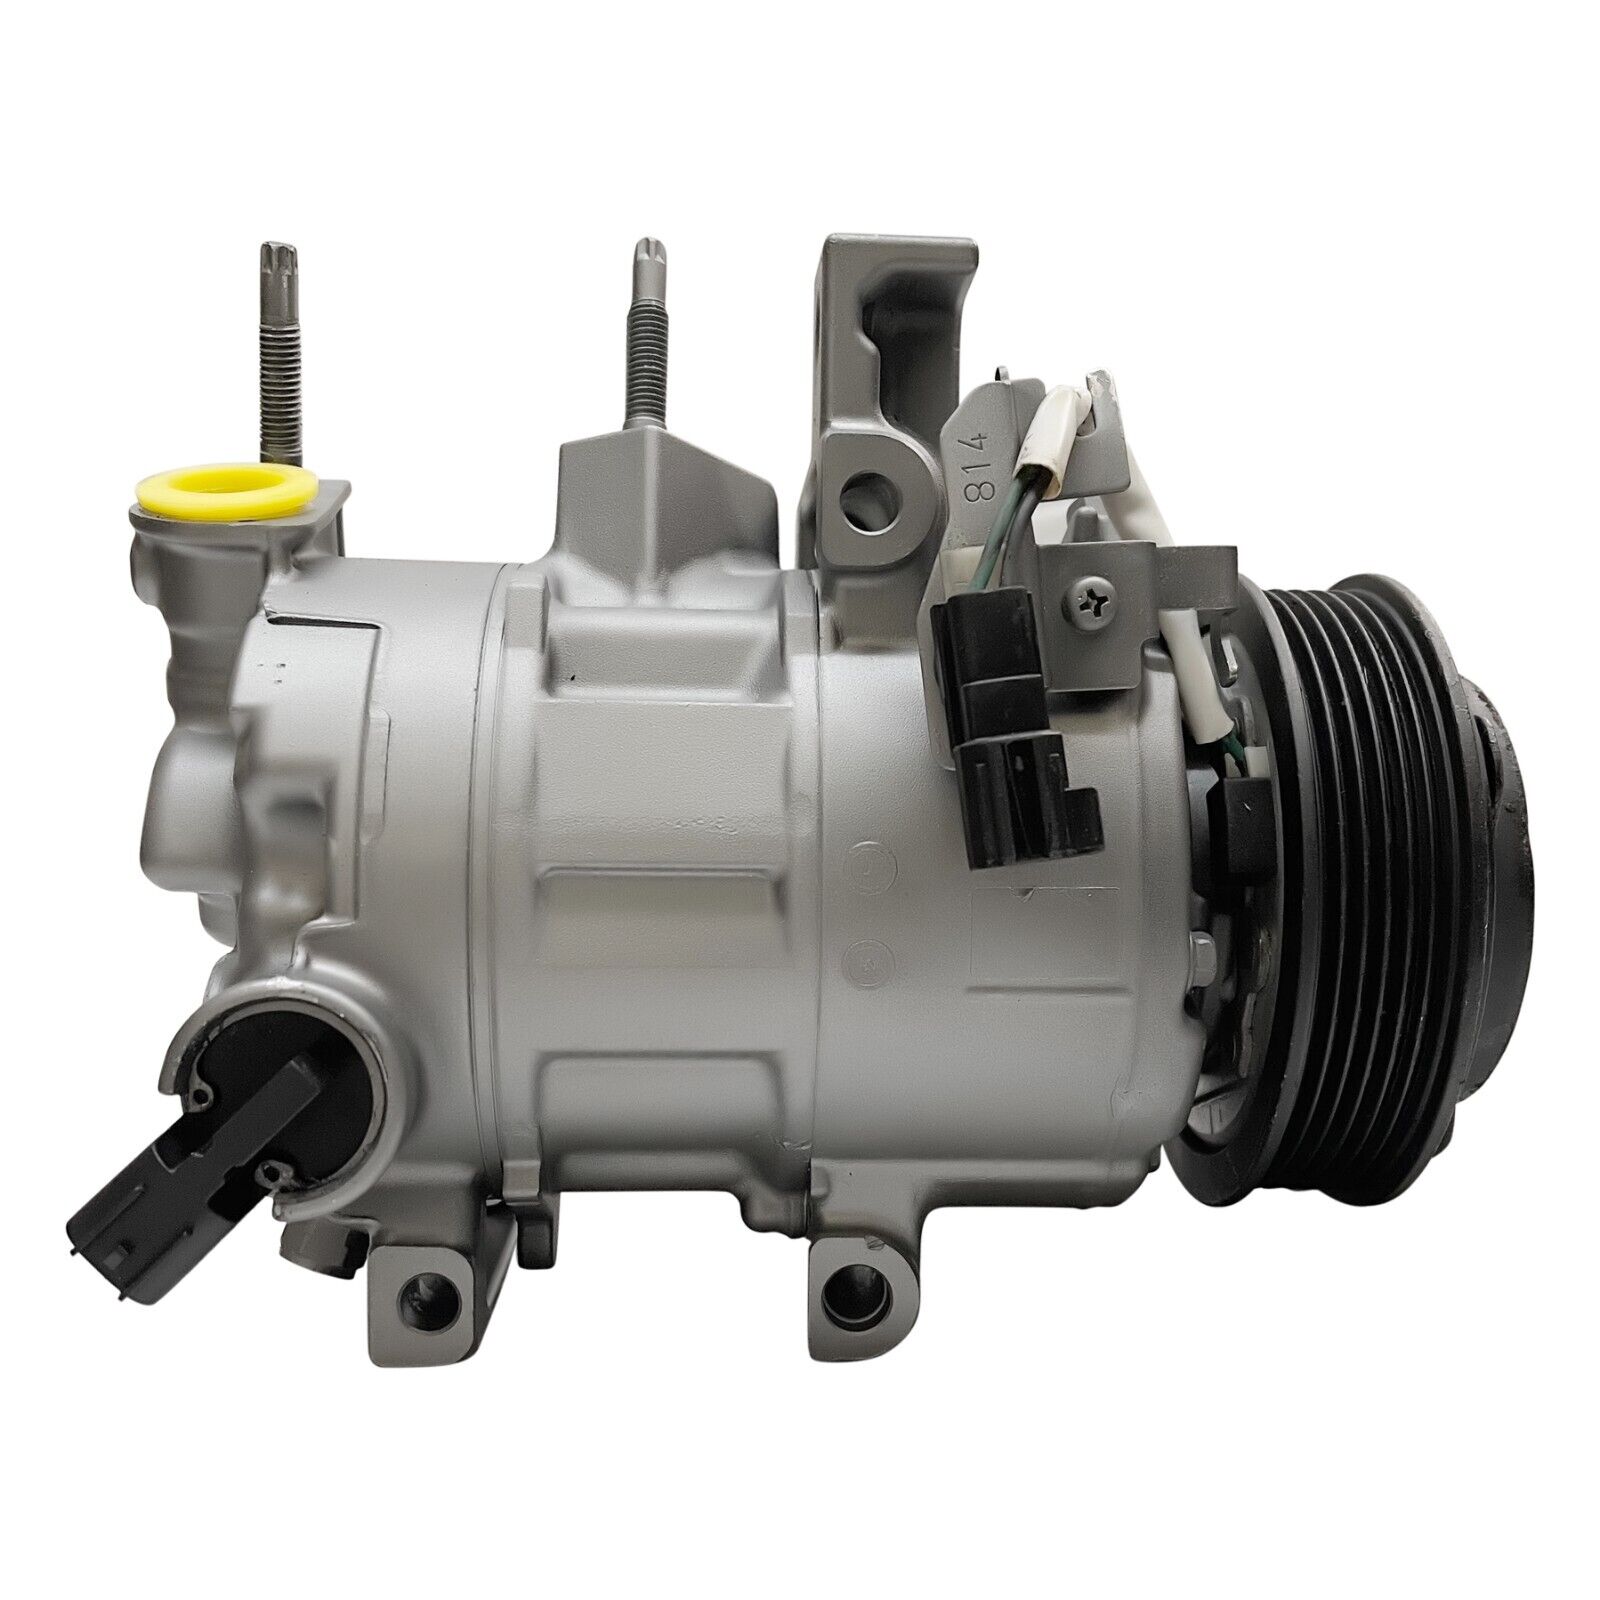 RYC Reman AC Compressor AD-1610 Fits Ford Mustang 5.0L 2018 2019 2020 2021 2022